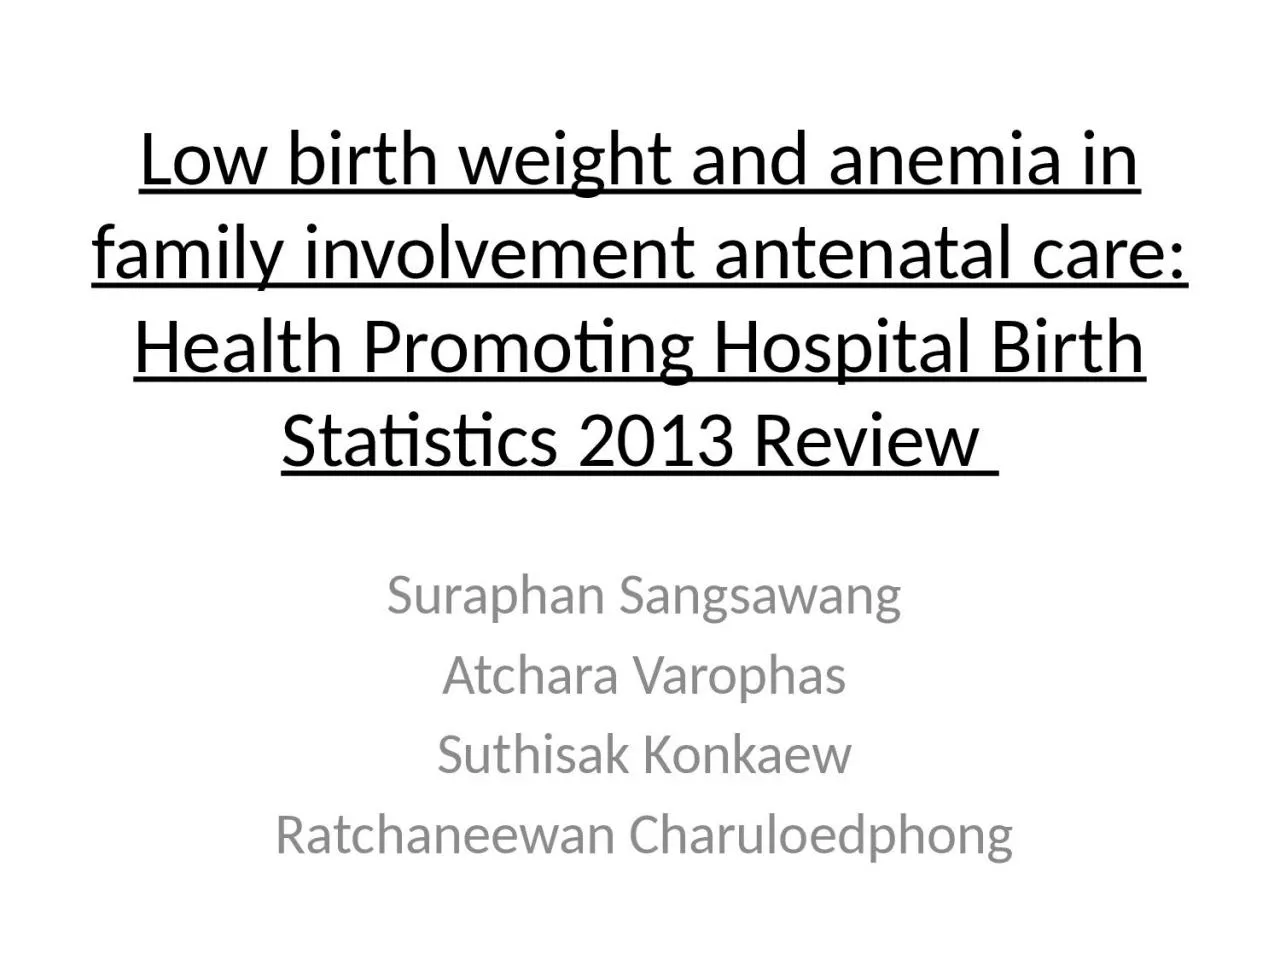 Low birth weight and anemia in family involvement antenatal care: Health Promoting Hospital